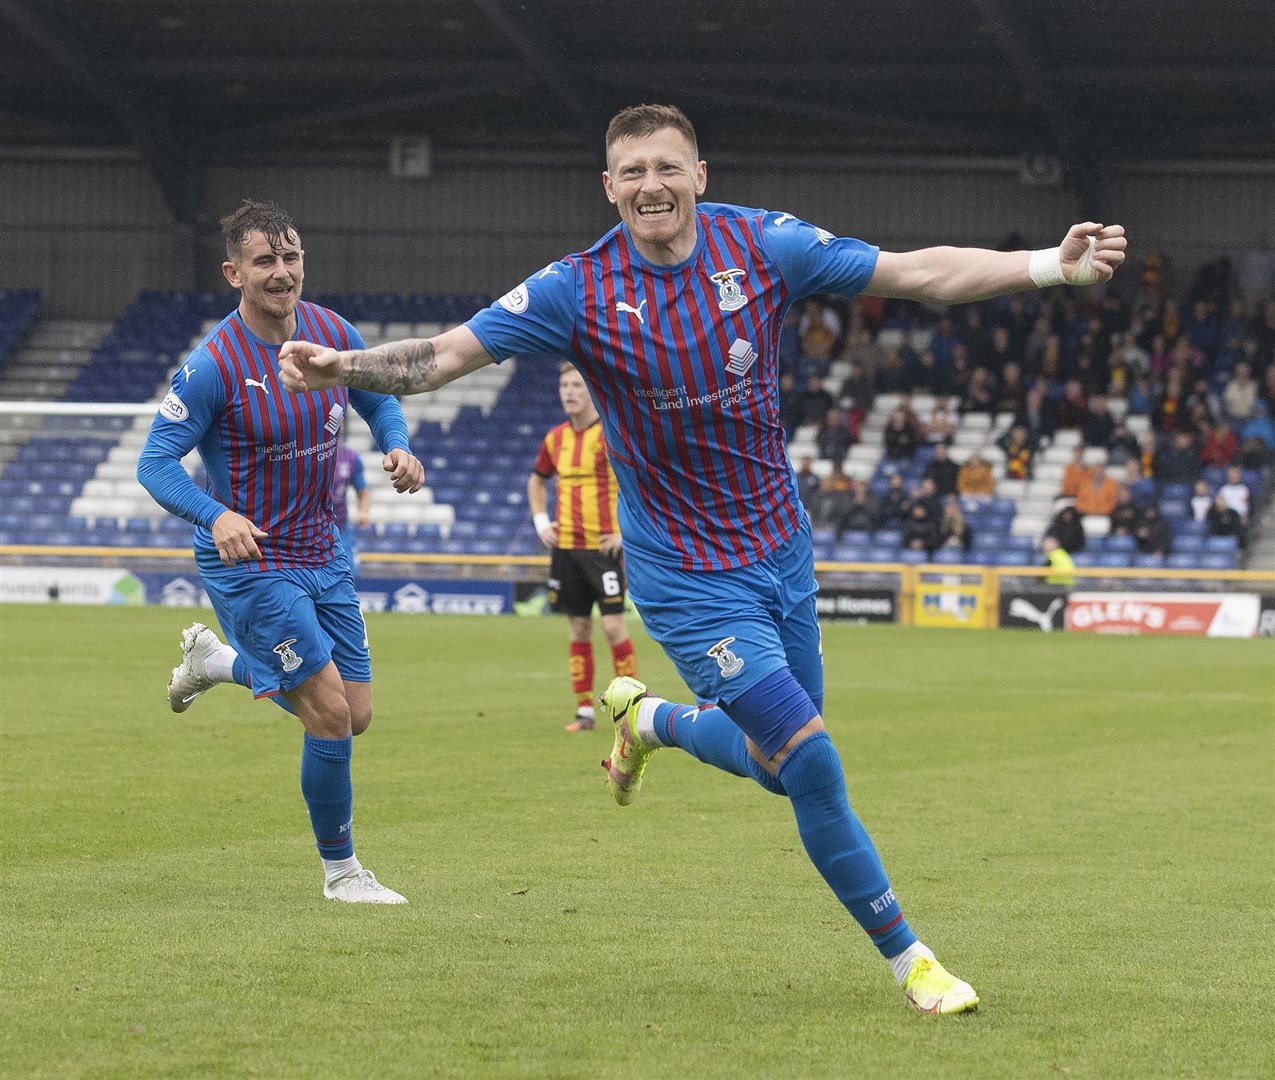 Shane Sutherland celebrates a goal for Inverness CT.